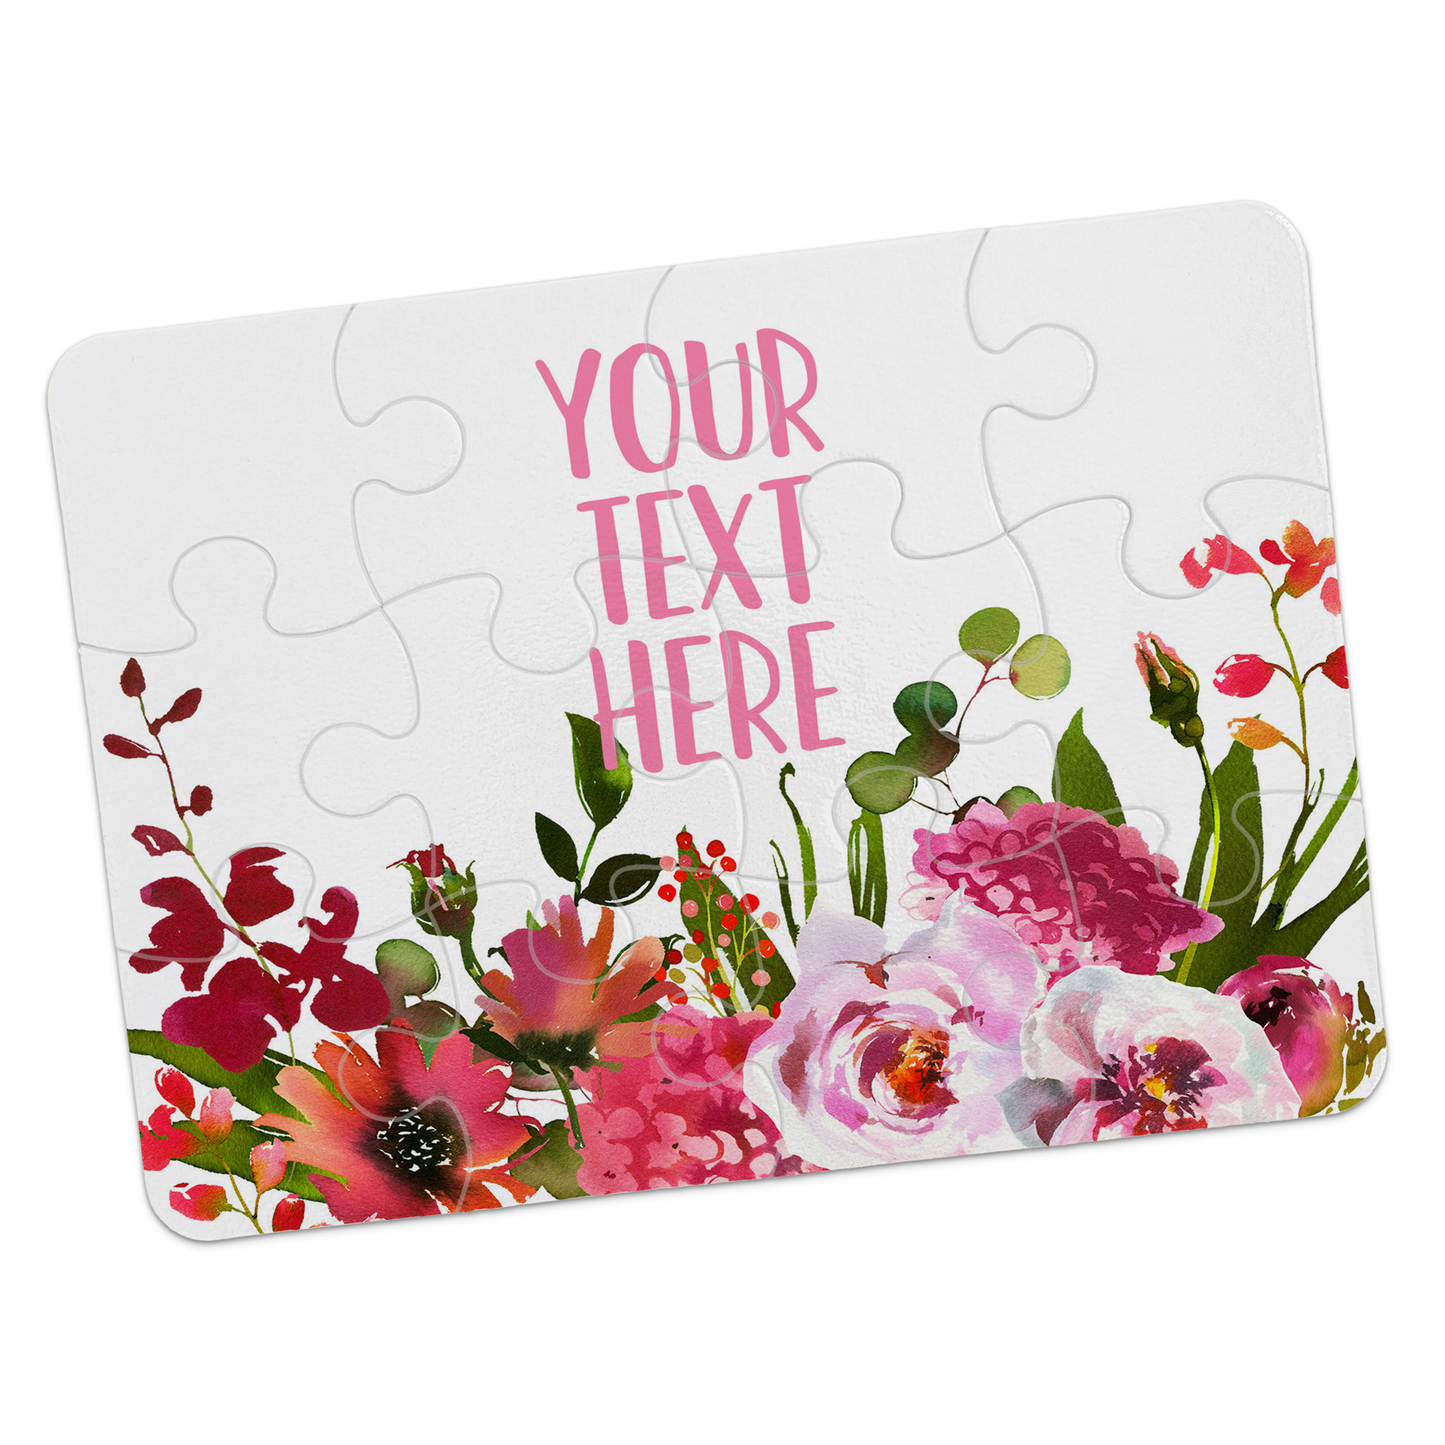 Create Your Own Puzzle - Floral Design - CYOP0149 | S'Berry Boutique